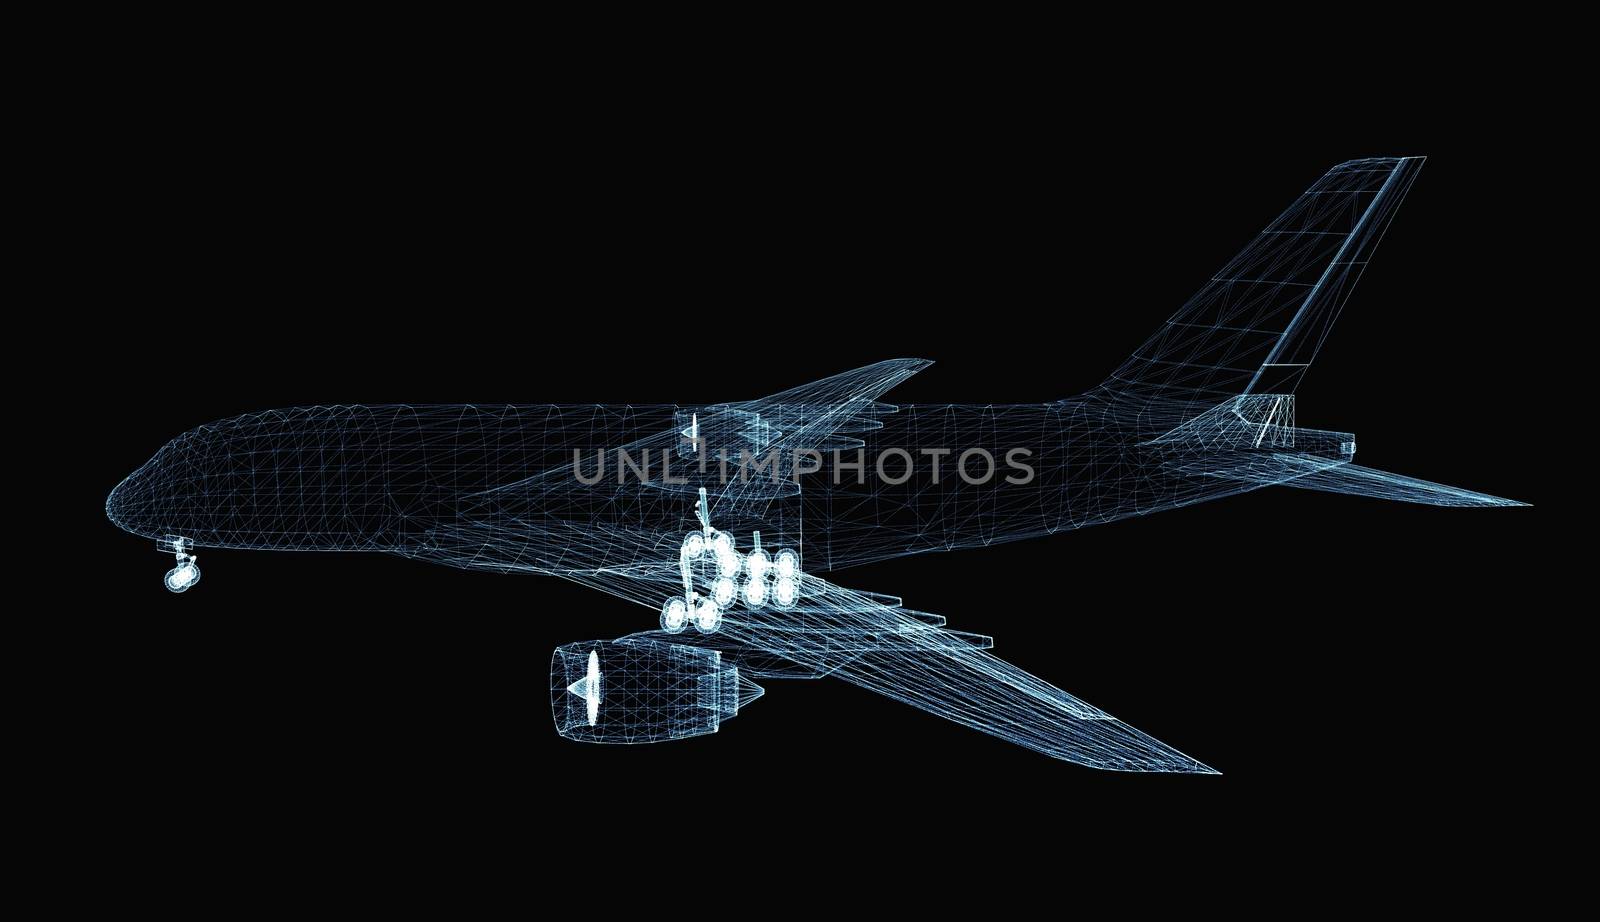 Abstract digital airplane consisting of luminous lines and dots. 3d illustration on a black background